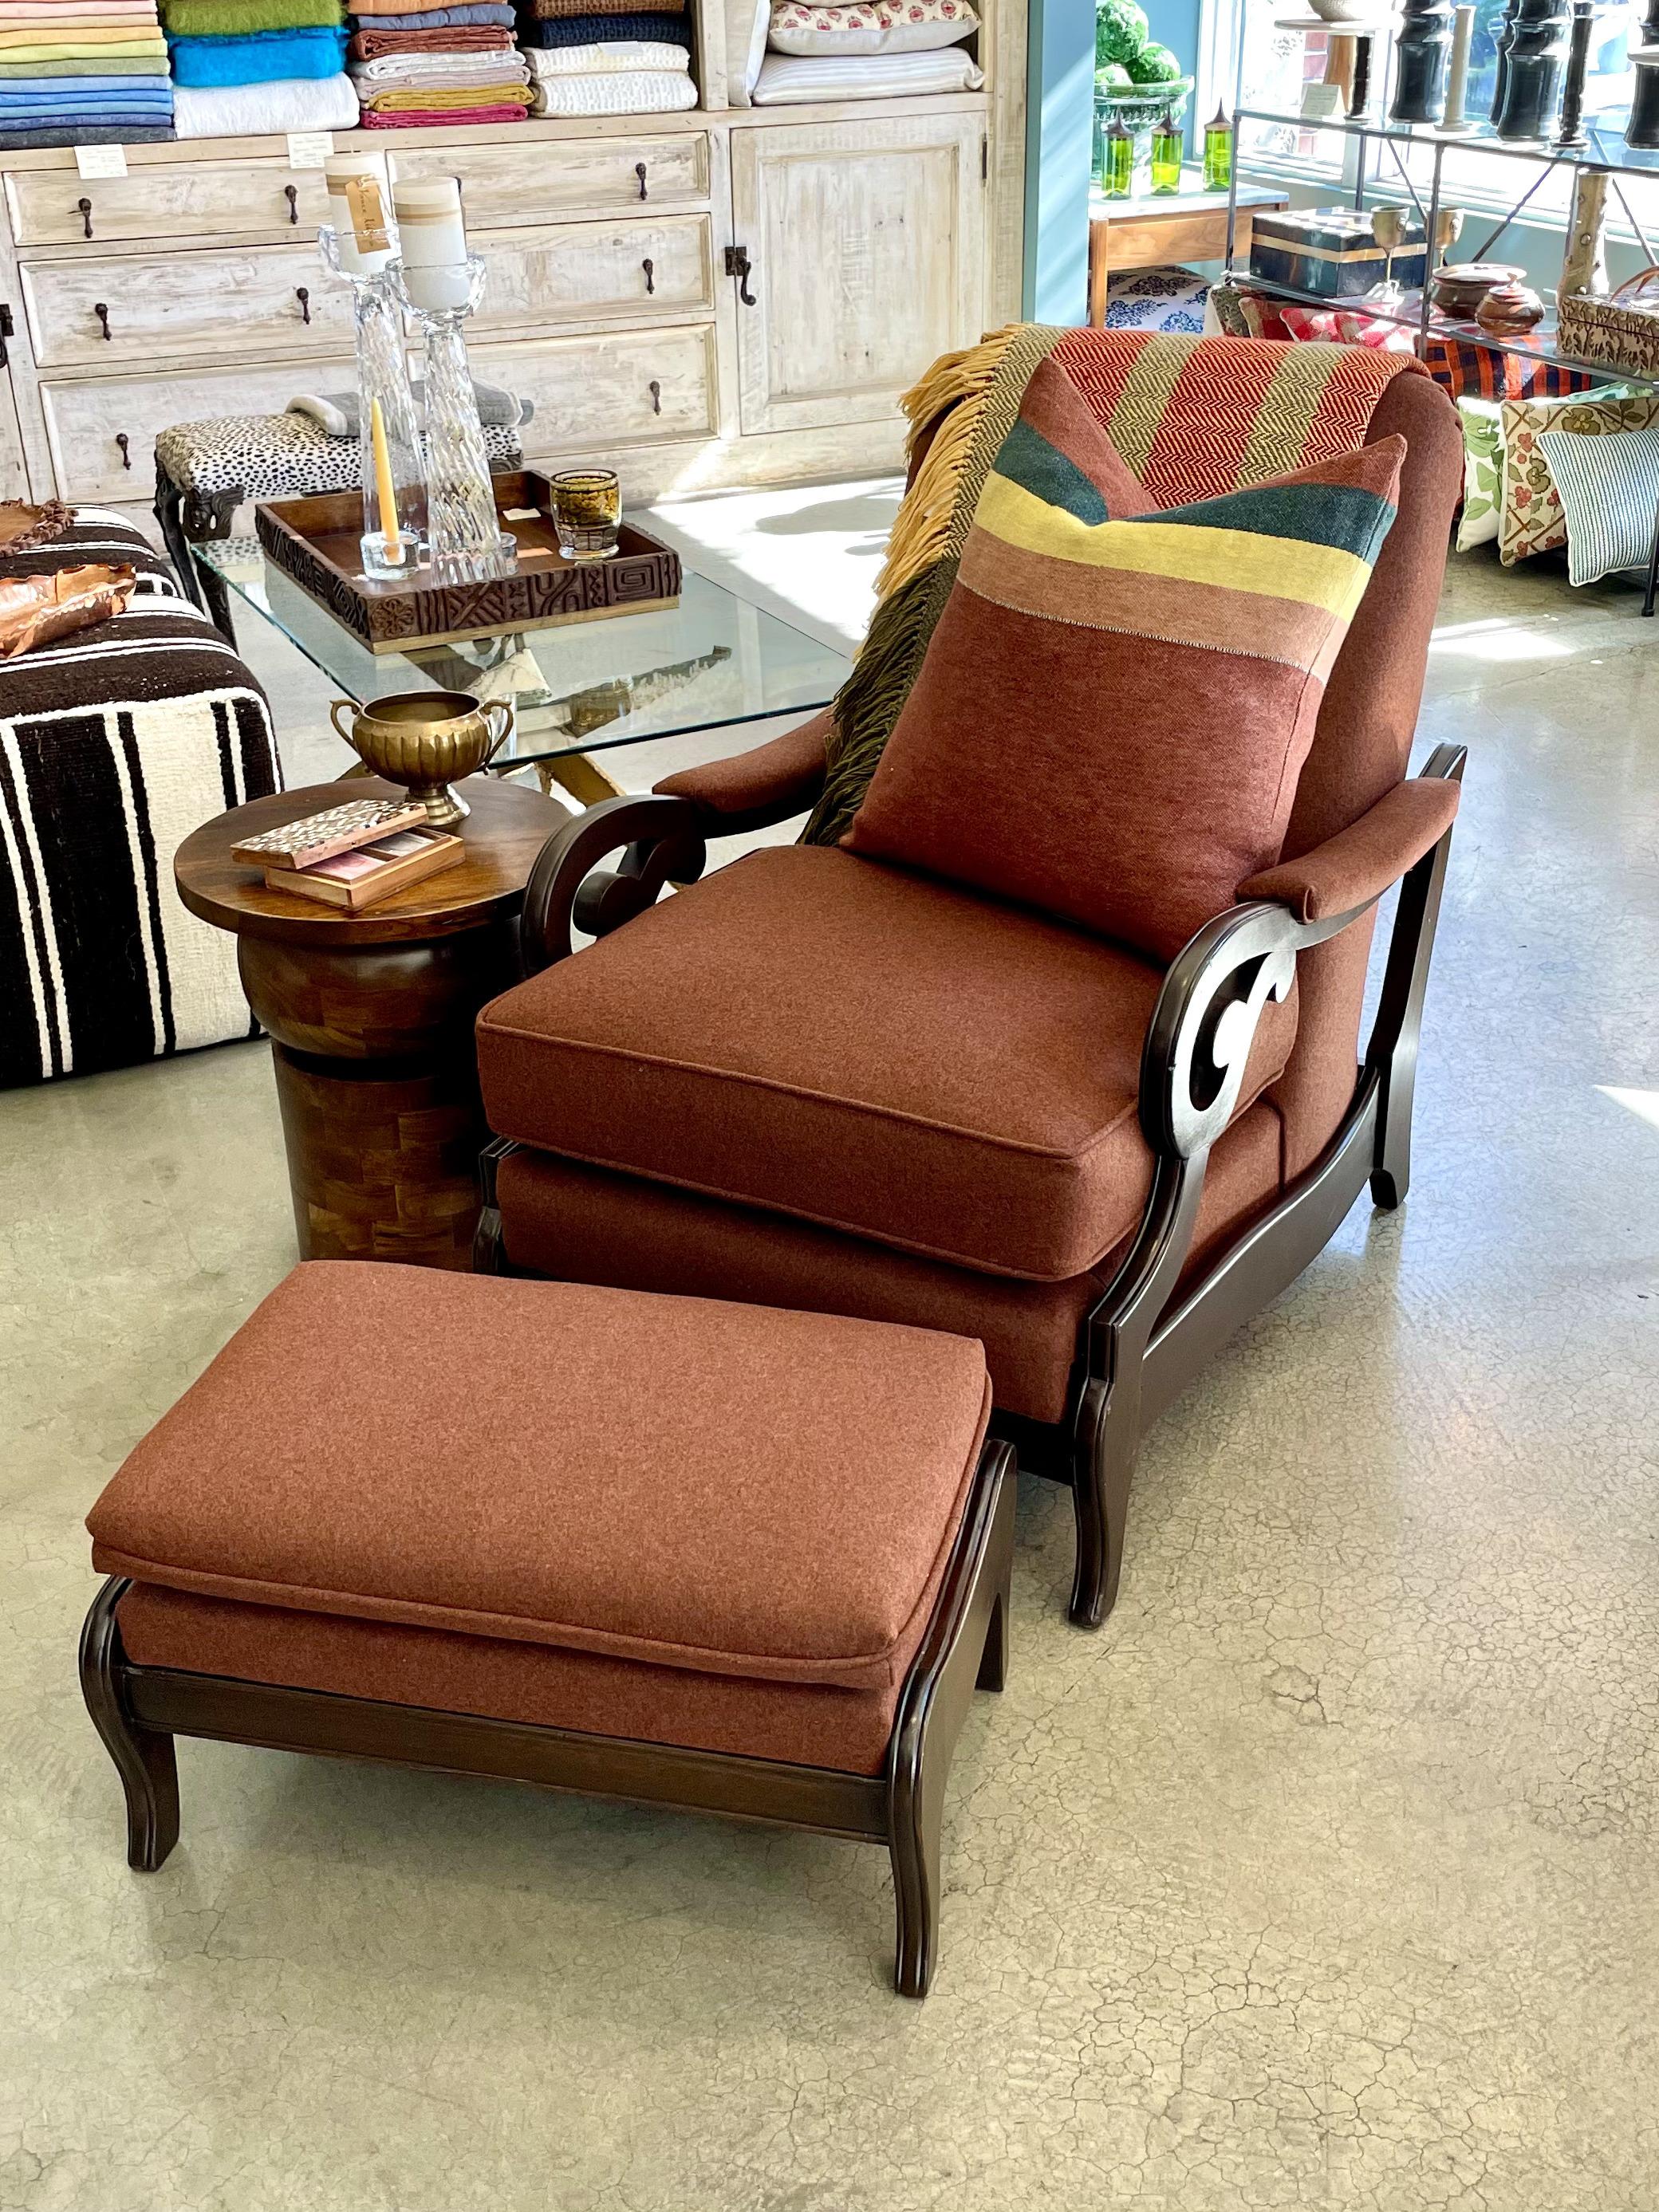 Handsome, inviting and ready for some serious R & R!

Fantastic 1940's Lounge Chair has matching footstool. The sturdy wood frame has been refinished and newly upholstered in a rich terra cotta felt wool from Italy. The seat cushion has been down